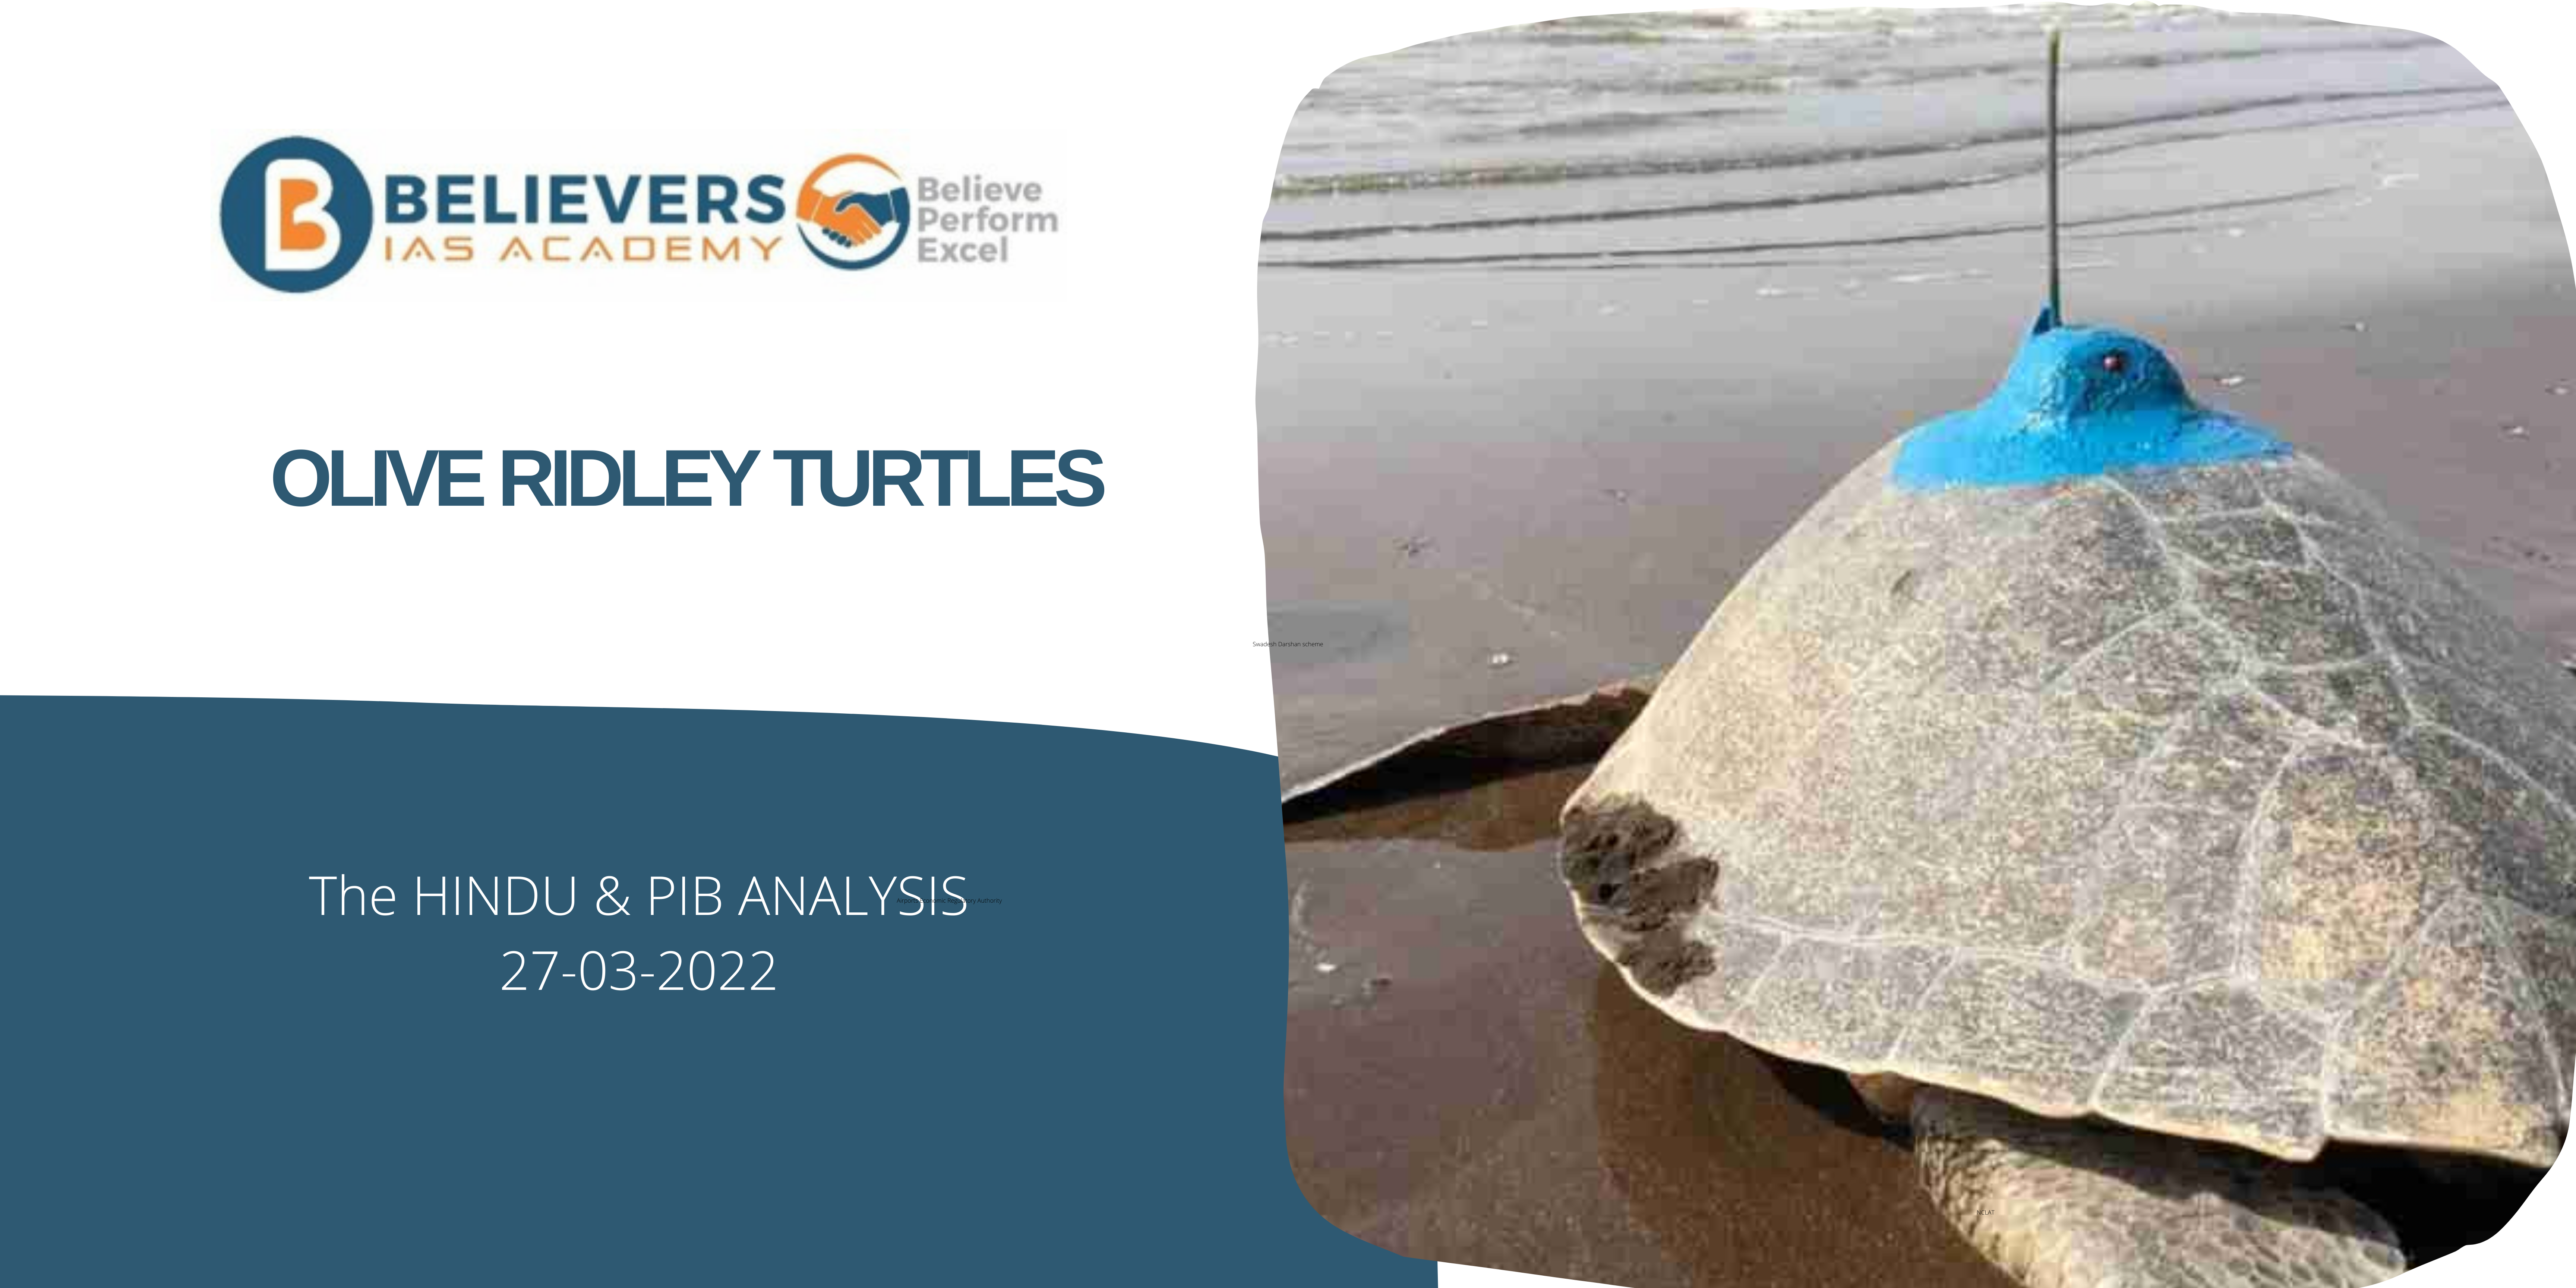 UPSC Current affairs - Olive Ridley Turtles